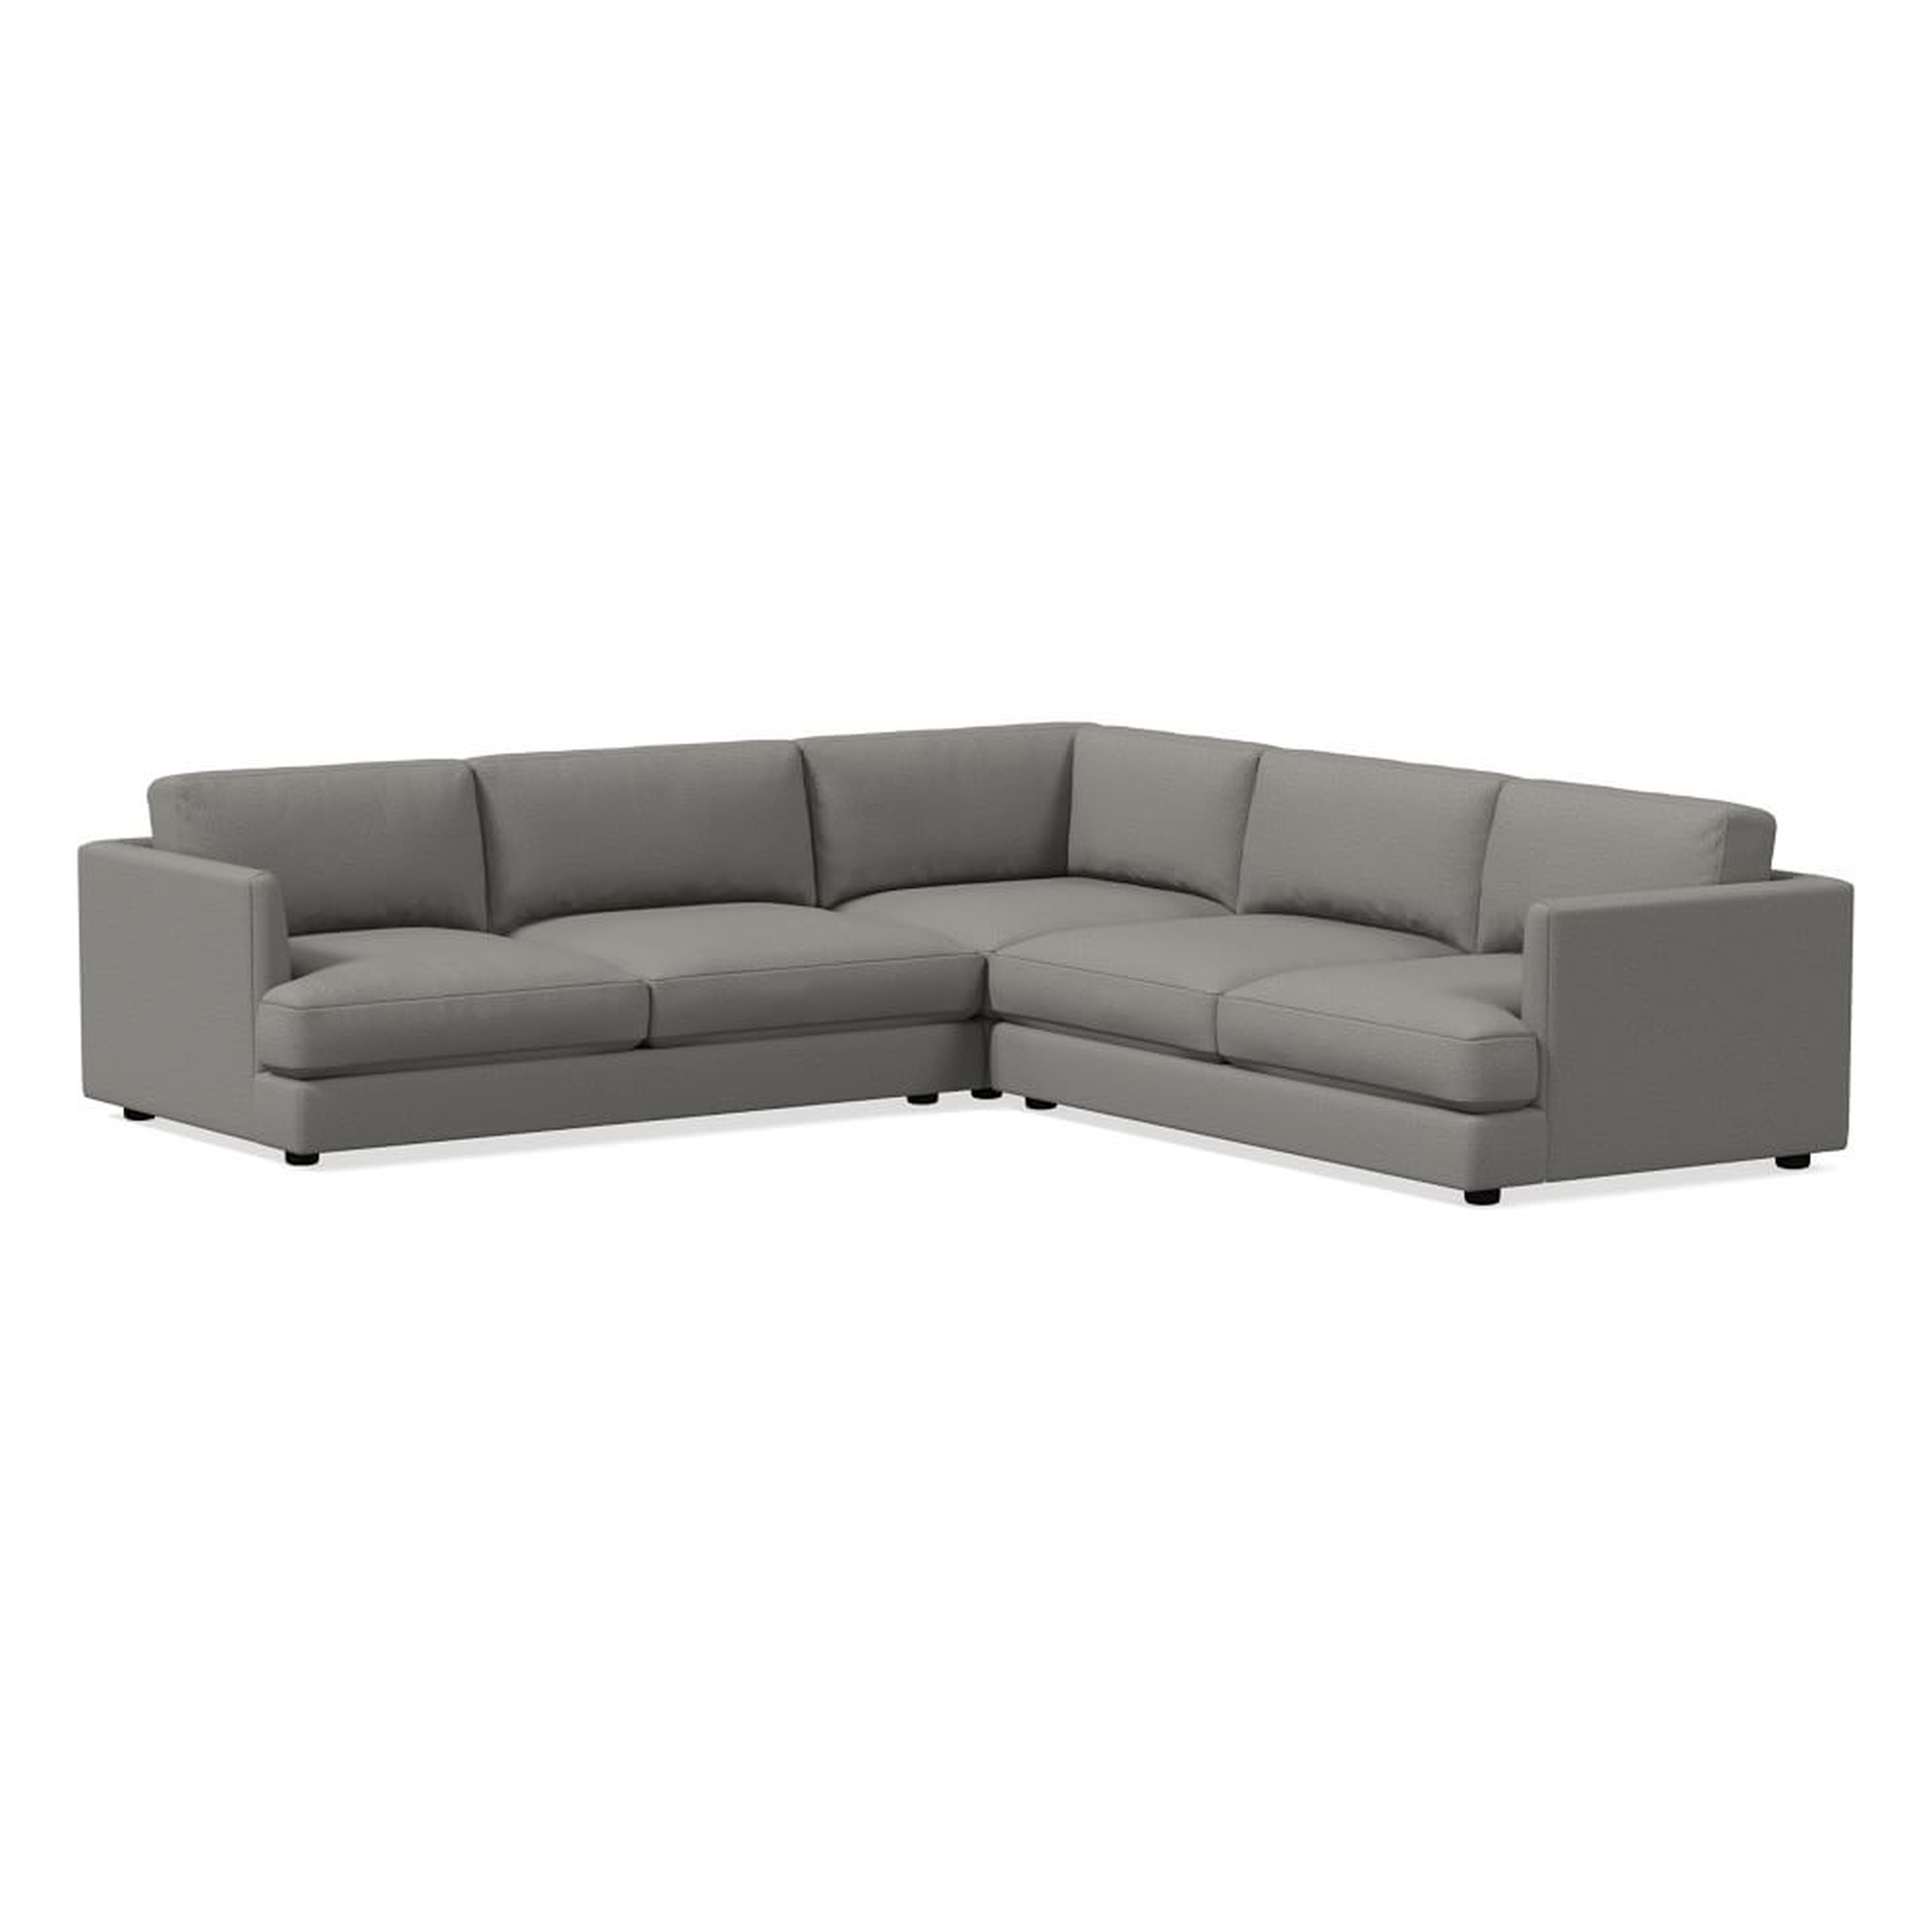 Haven 106" Multi Seat 3-Piece L-Shaped Sectional, Standard Depth, Chenille Tweed, Silver - West Elm